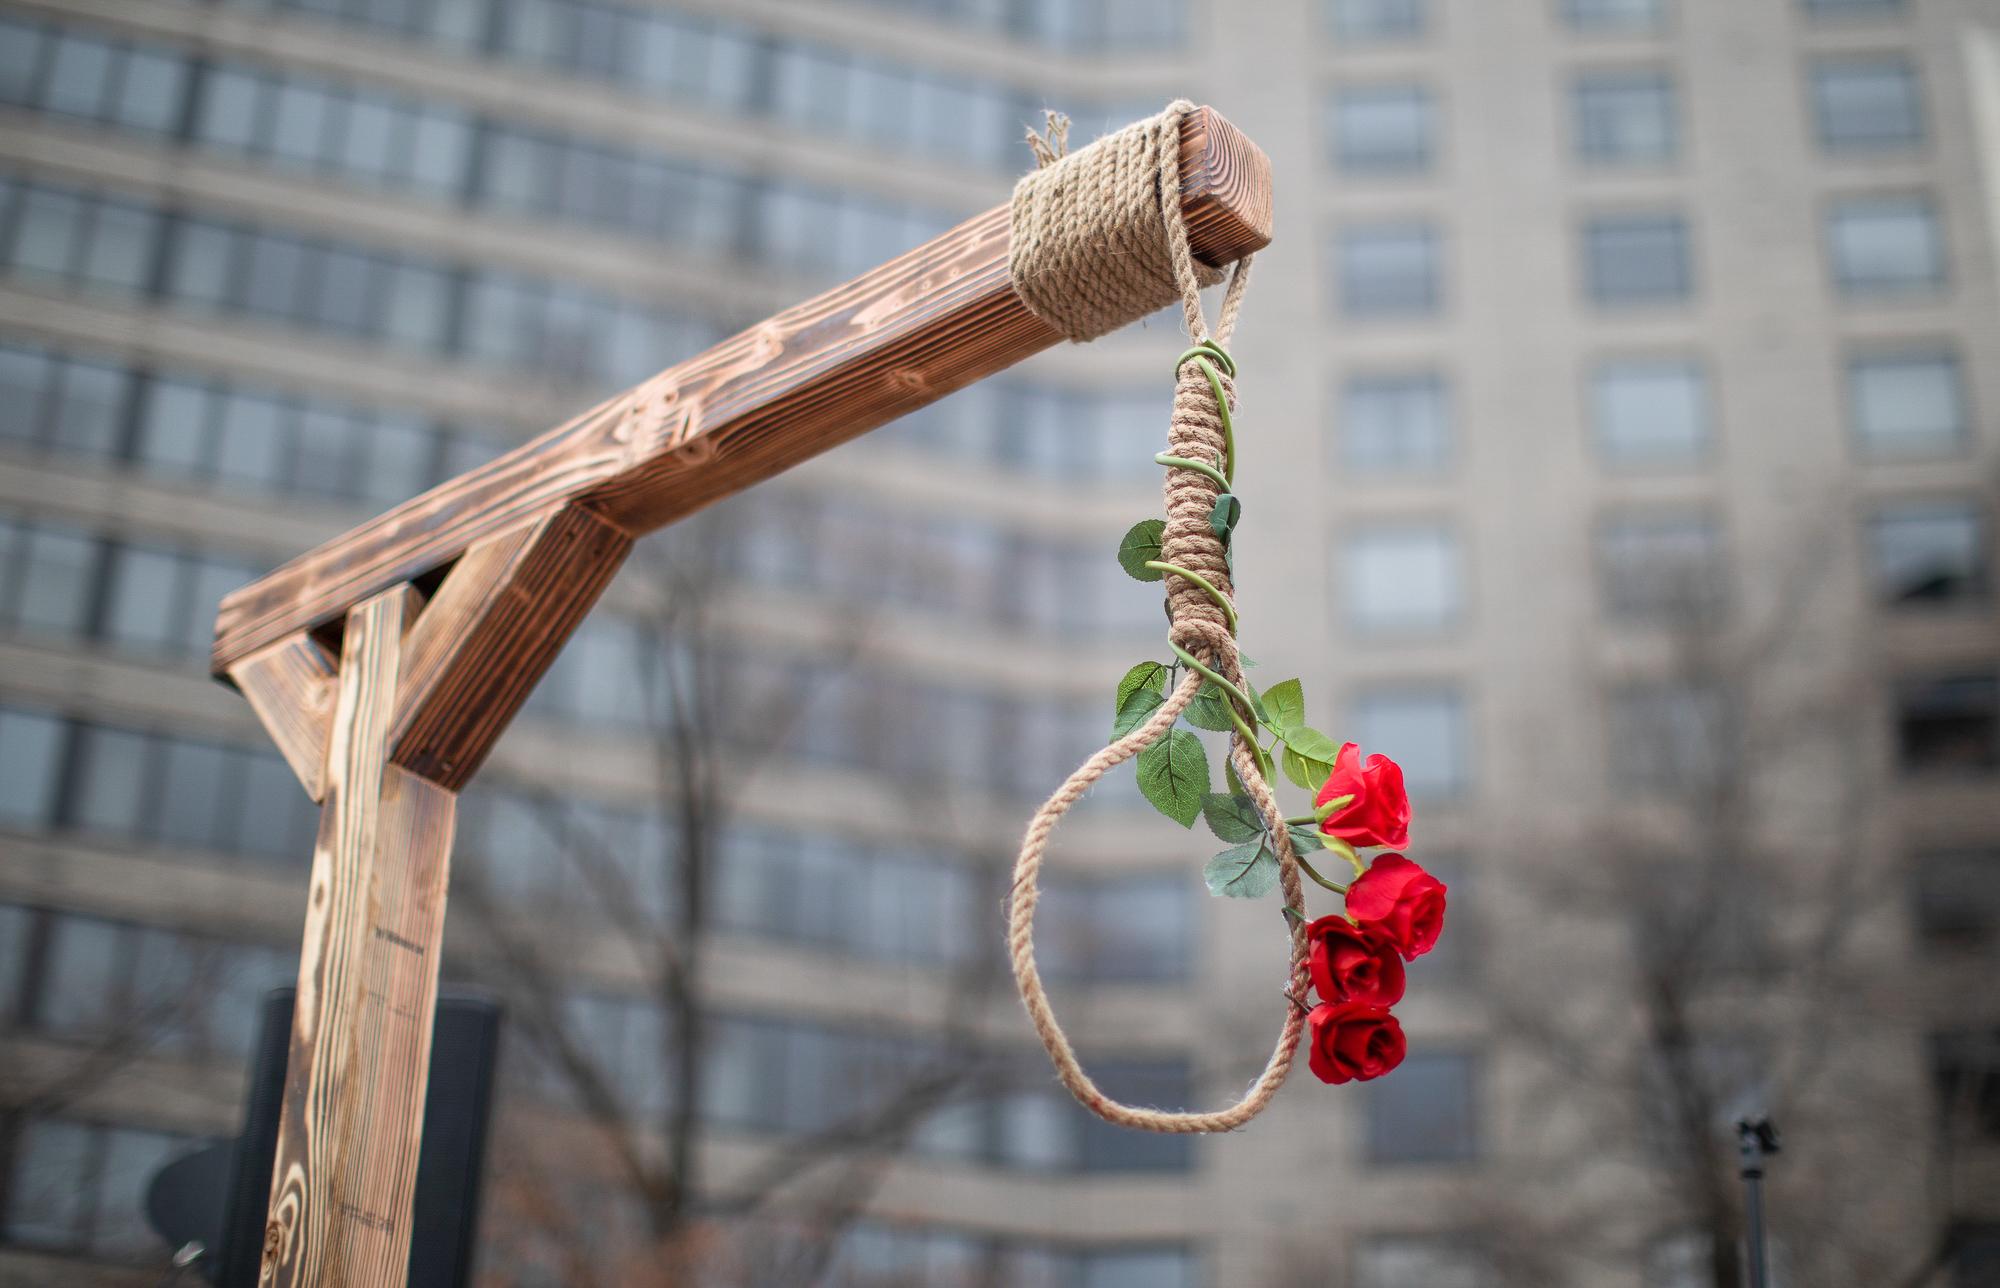 Iran execution: US protests - Washington, D.C. - December 10, 2022: A noose hangsfrom a...